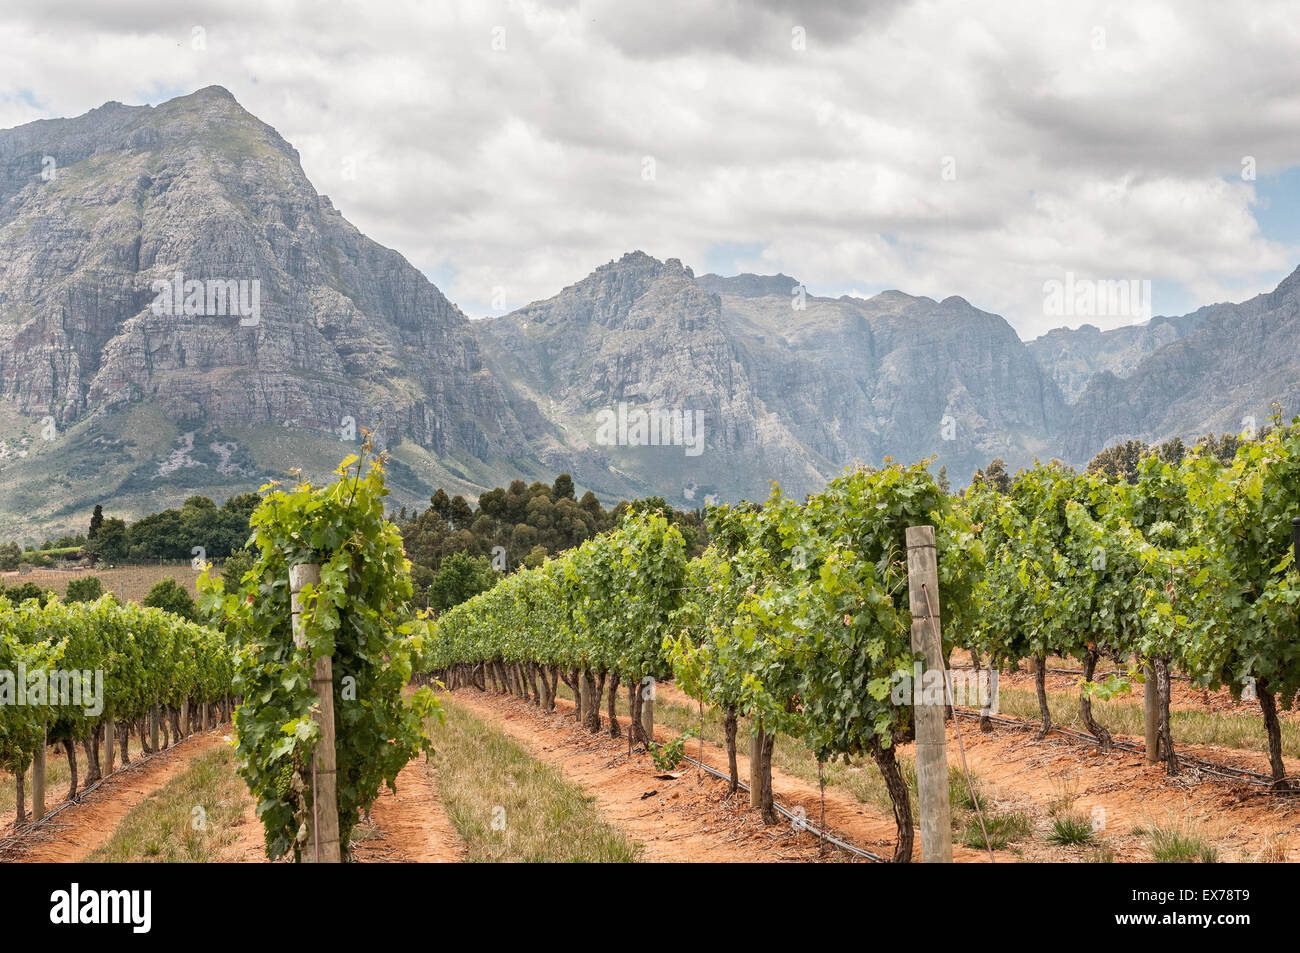 View of vineyards near Stellenbosch in the Western Cape Province of South Africa. The Simonsberg mountain is in the background Stock Photo